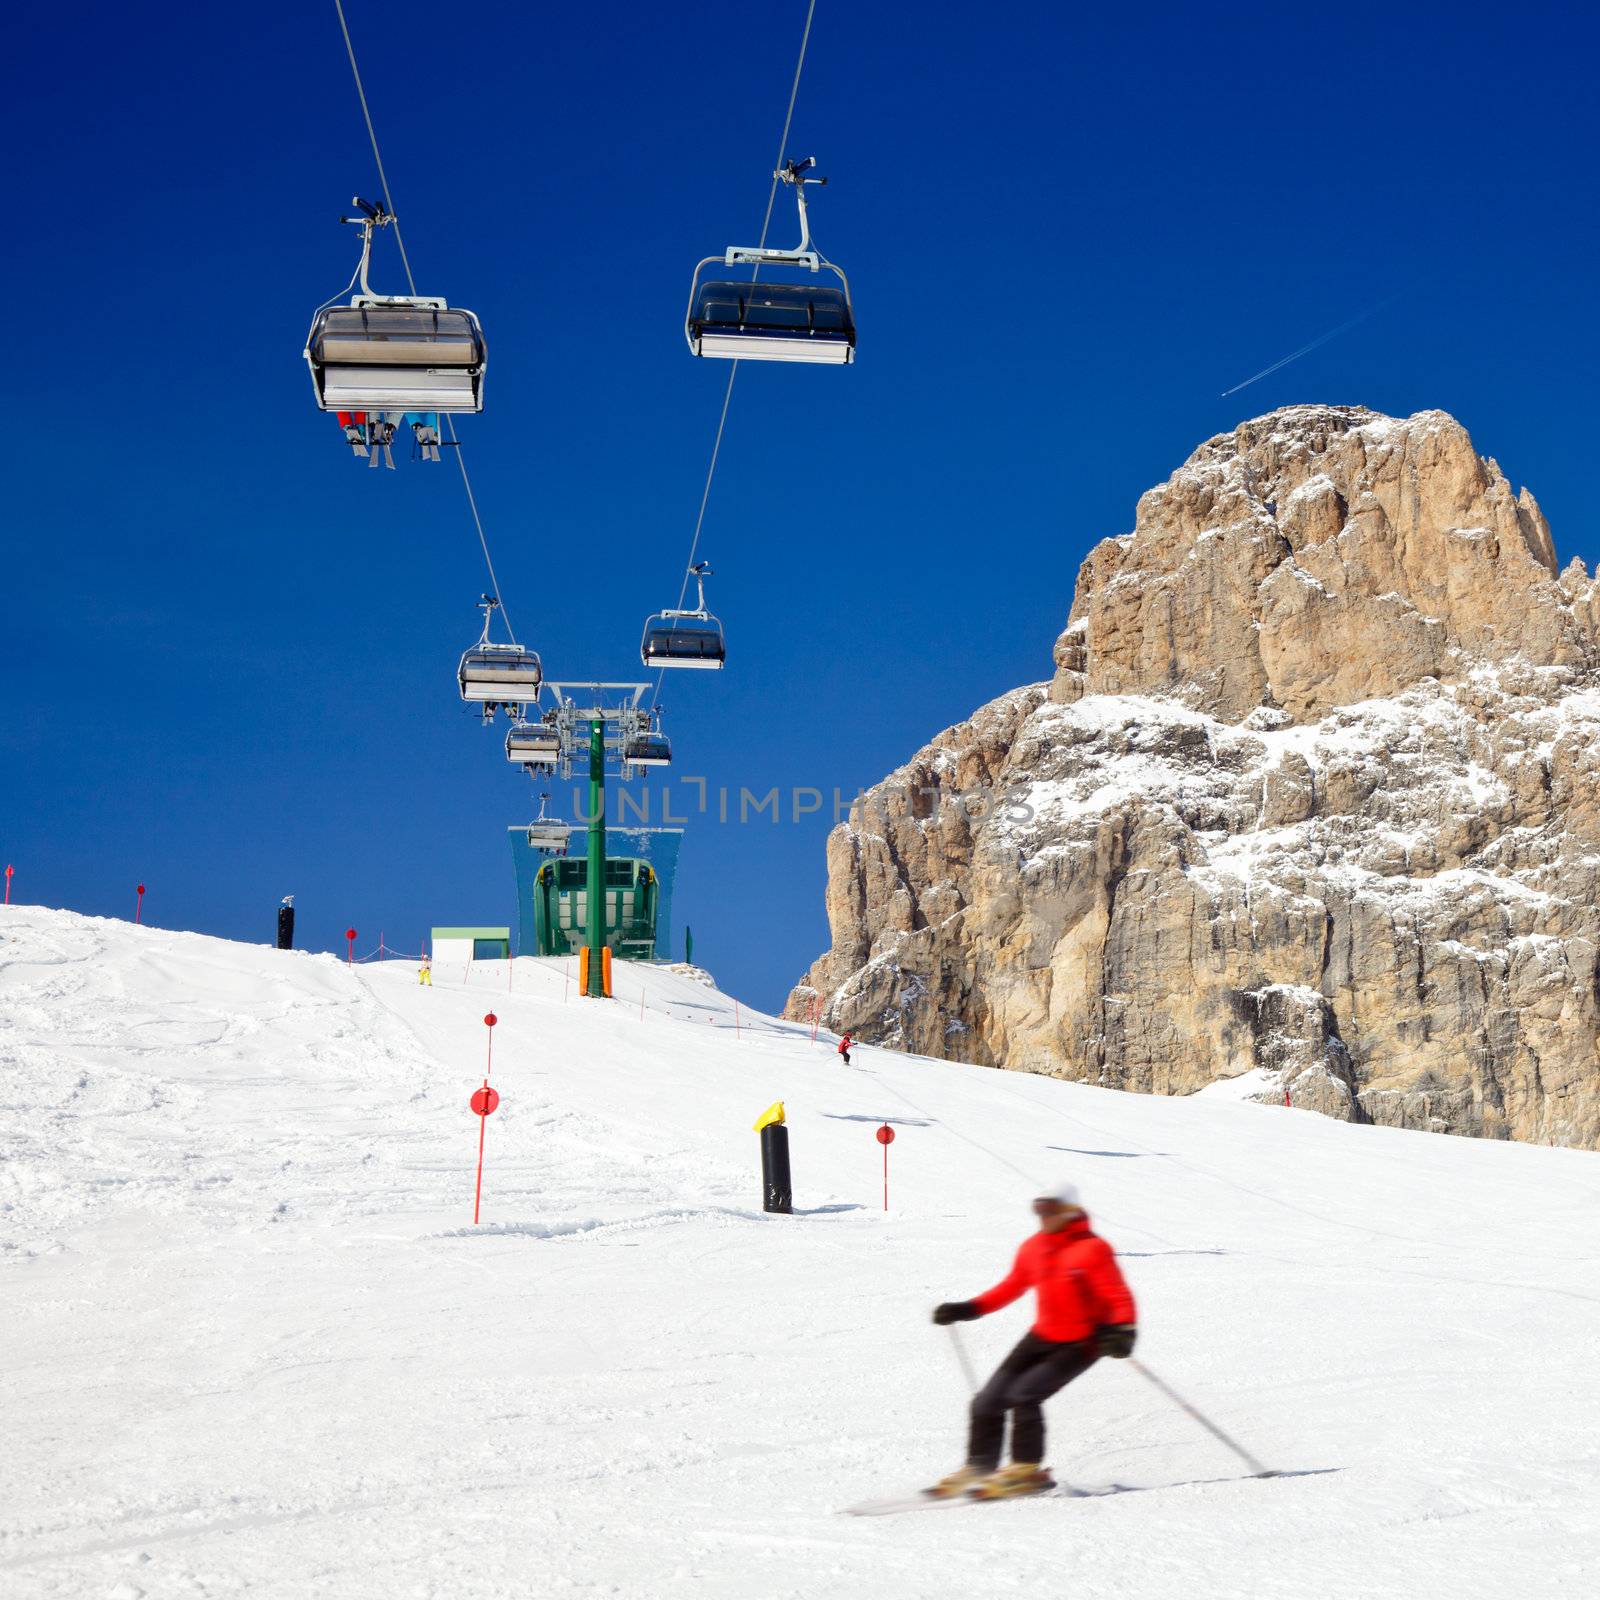 Skier going down the slope under ski lift at Sella Ronda ski route in Italy